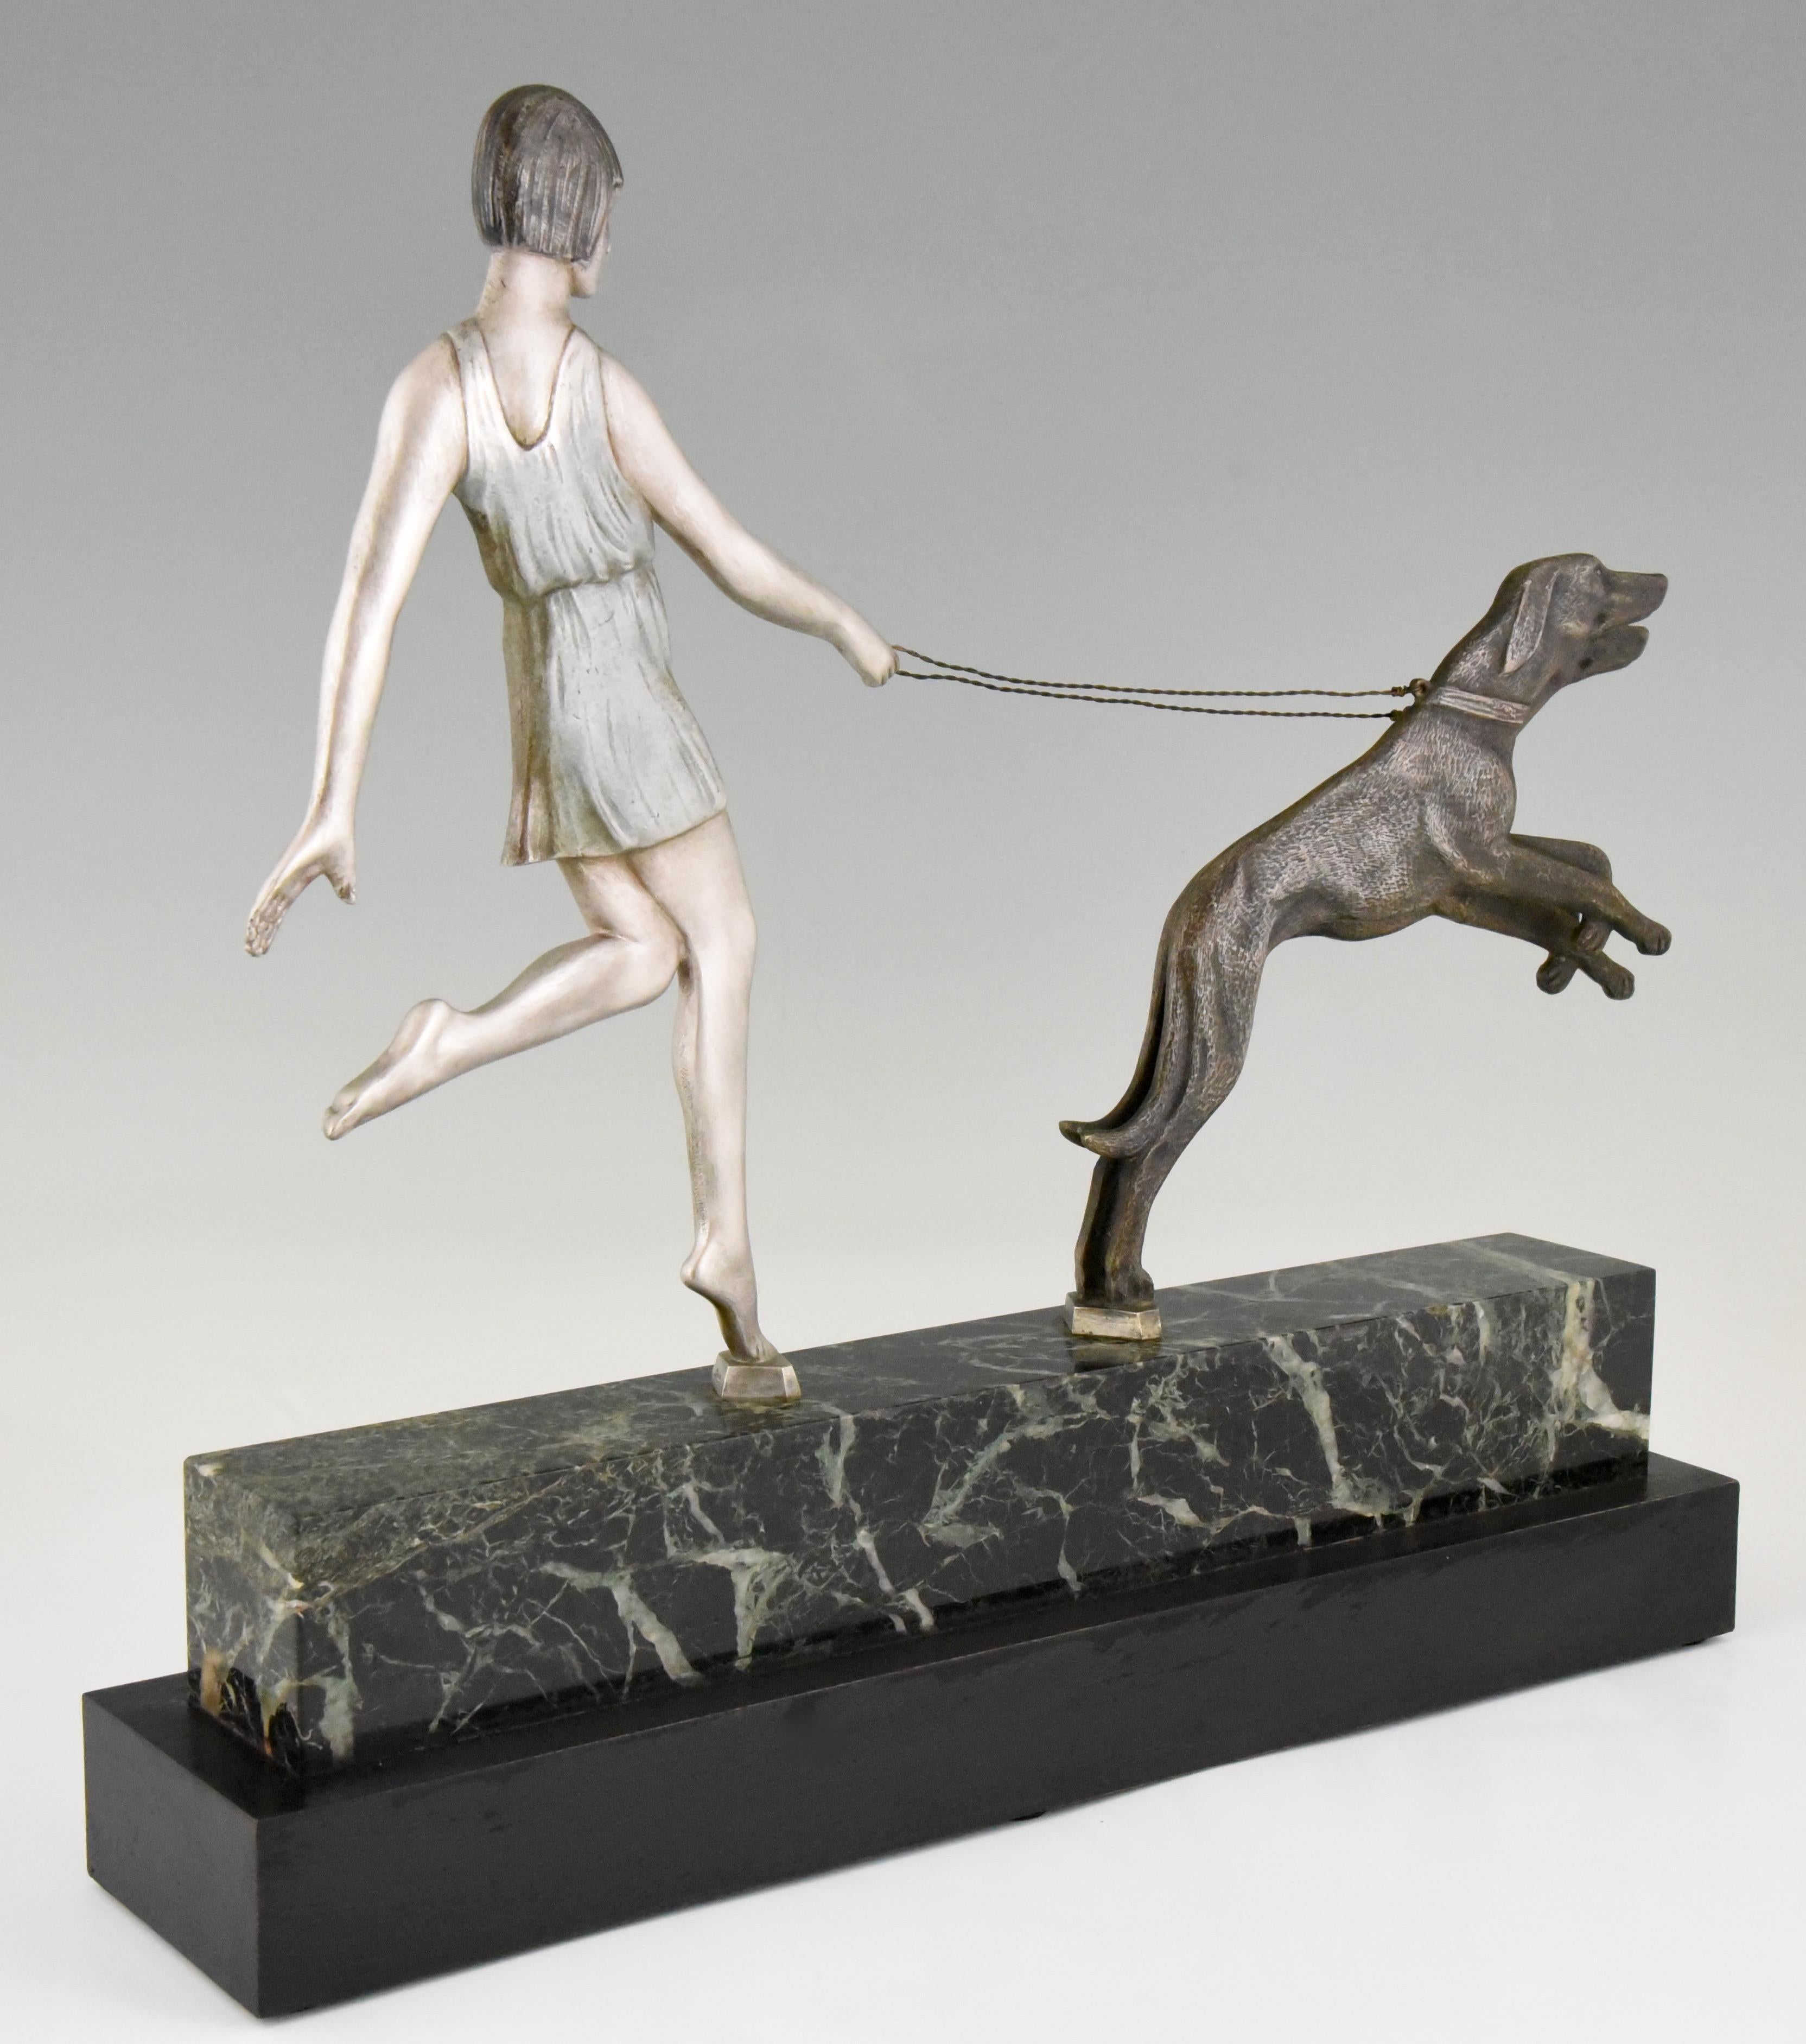 20th Century Art Deco Bronze Sculpture Girl with Dogs by Janle, 1930